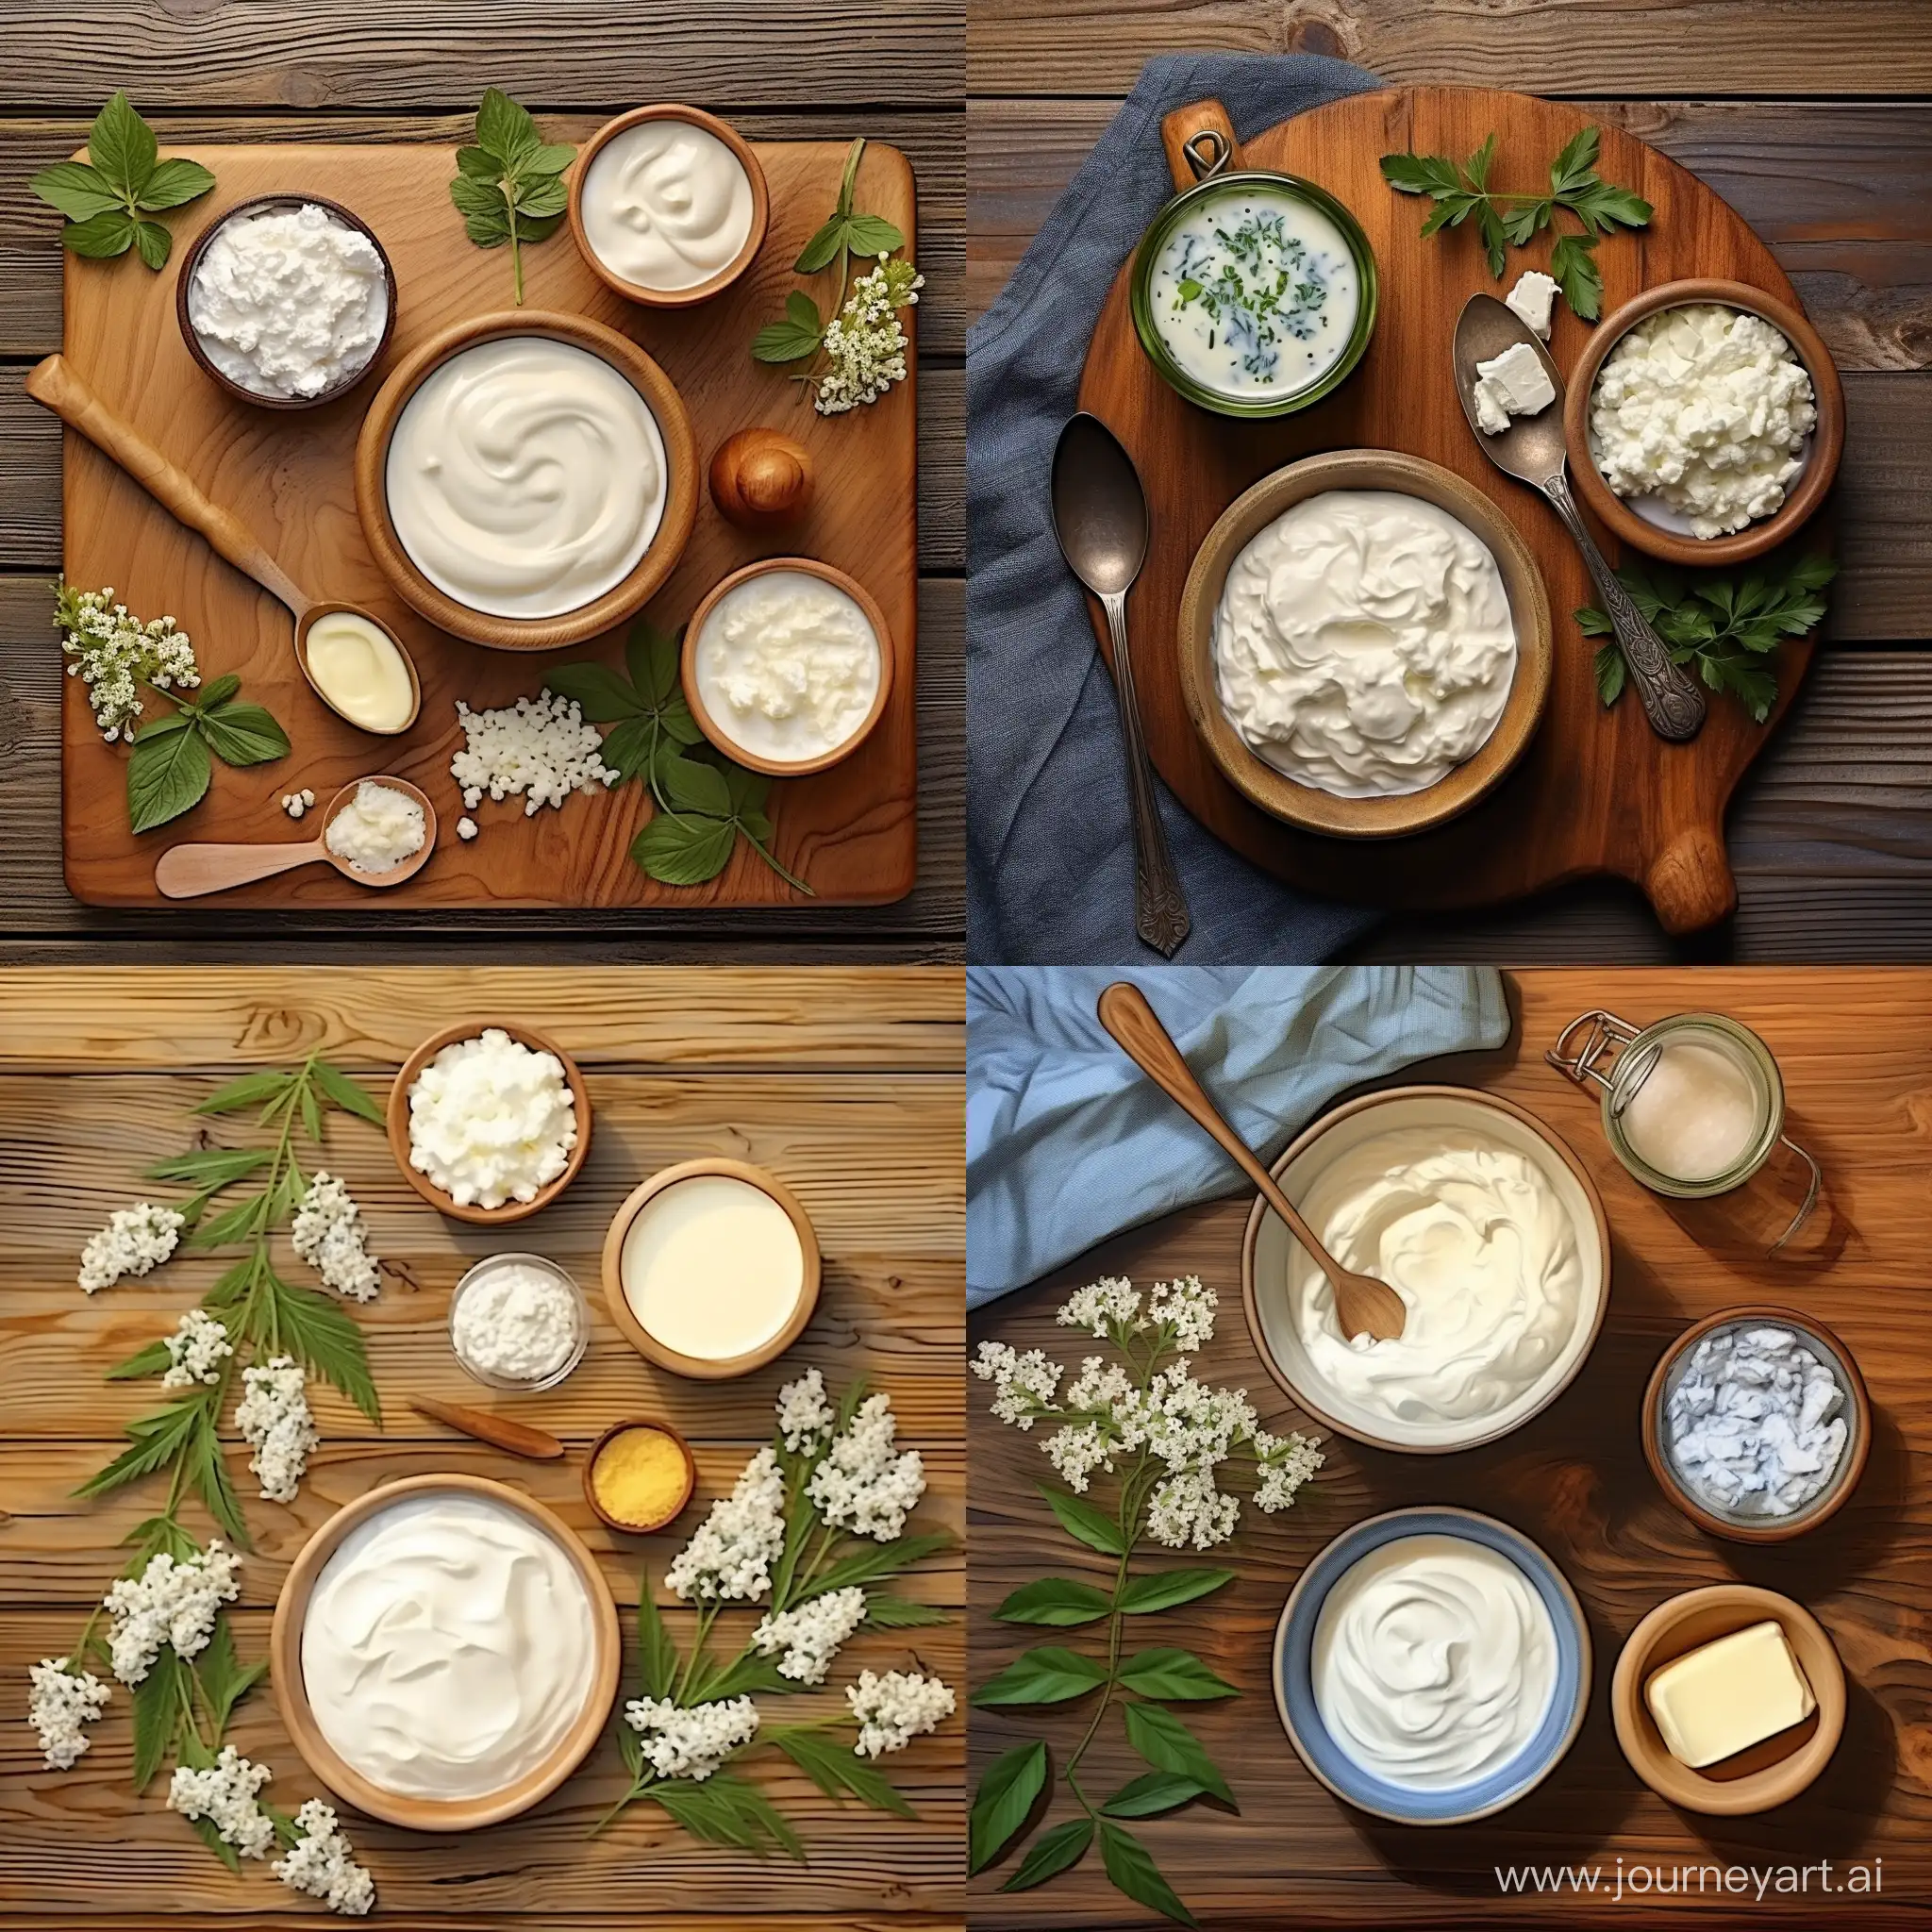 Rustic-Dairy-Delights-Top-View-of-Table-with-Milk-Sour-Cream-Ghee-Cottage-Cheese-Suluguni-Cheese